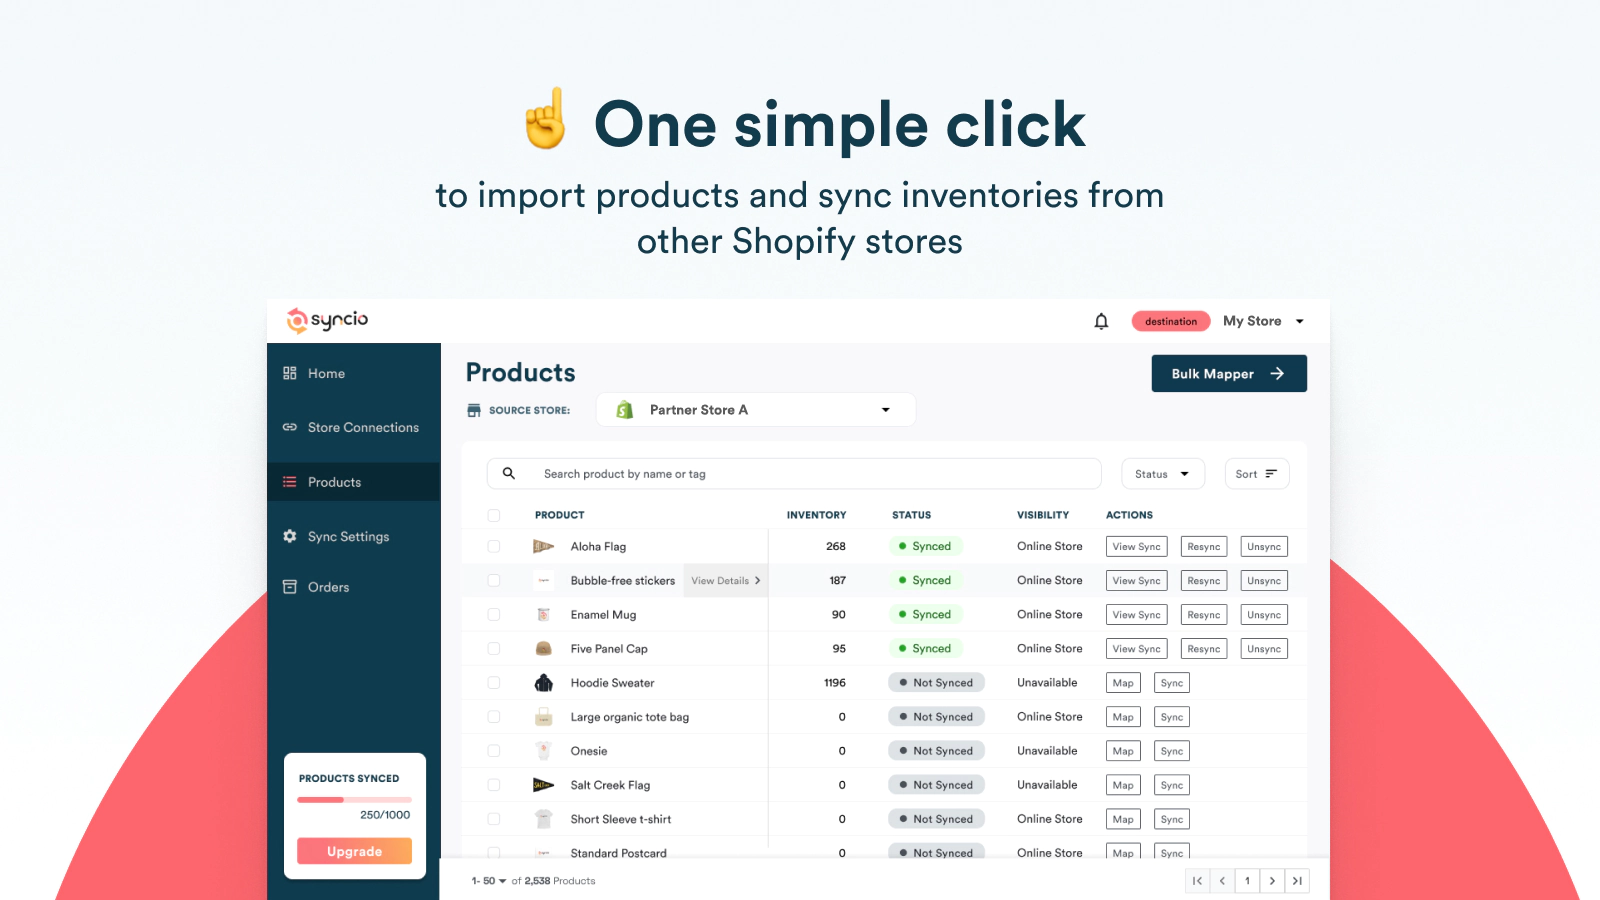 syncio app screenshot showing table of products for easy import